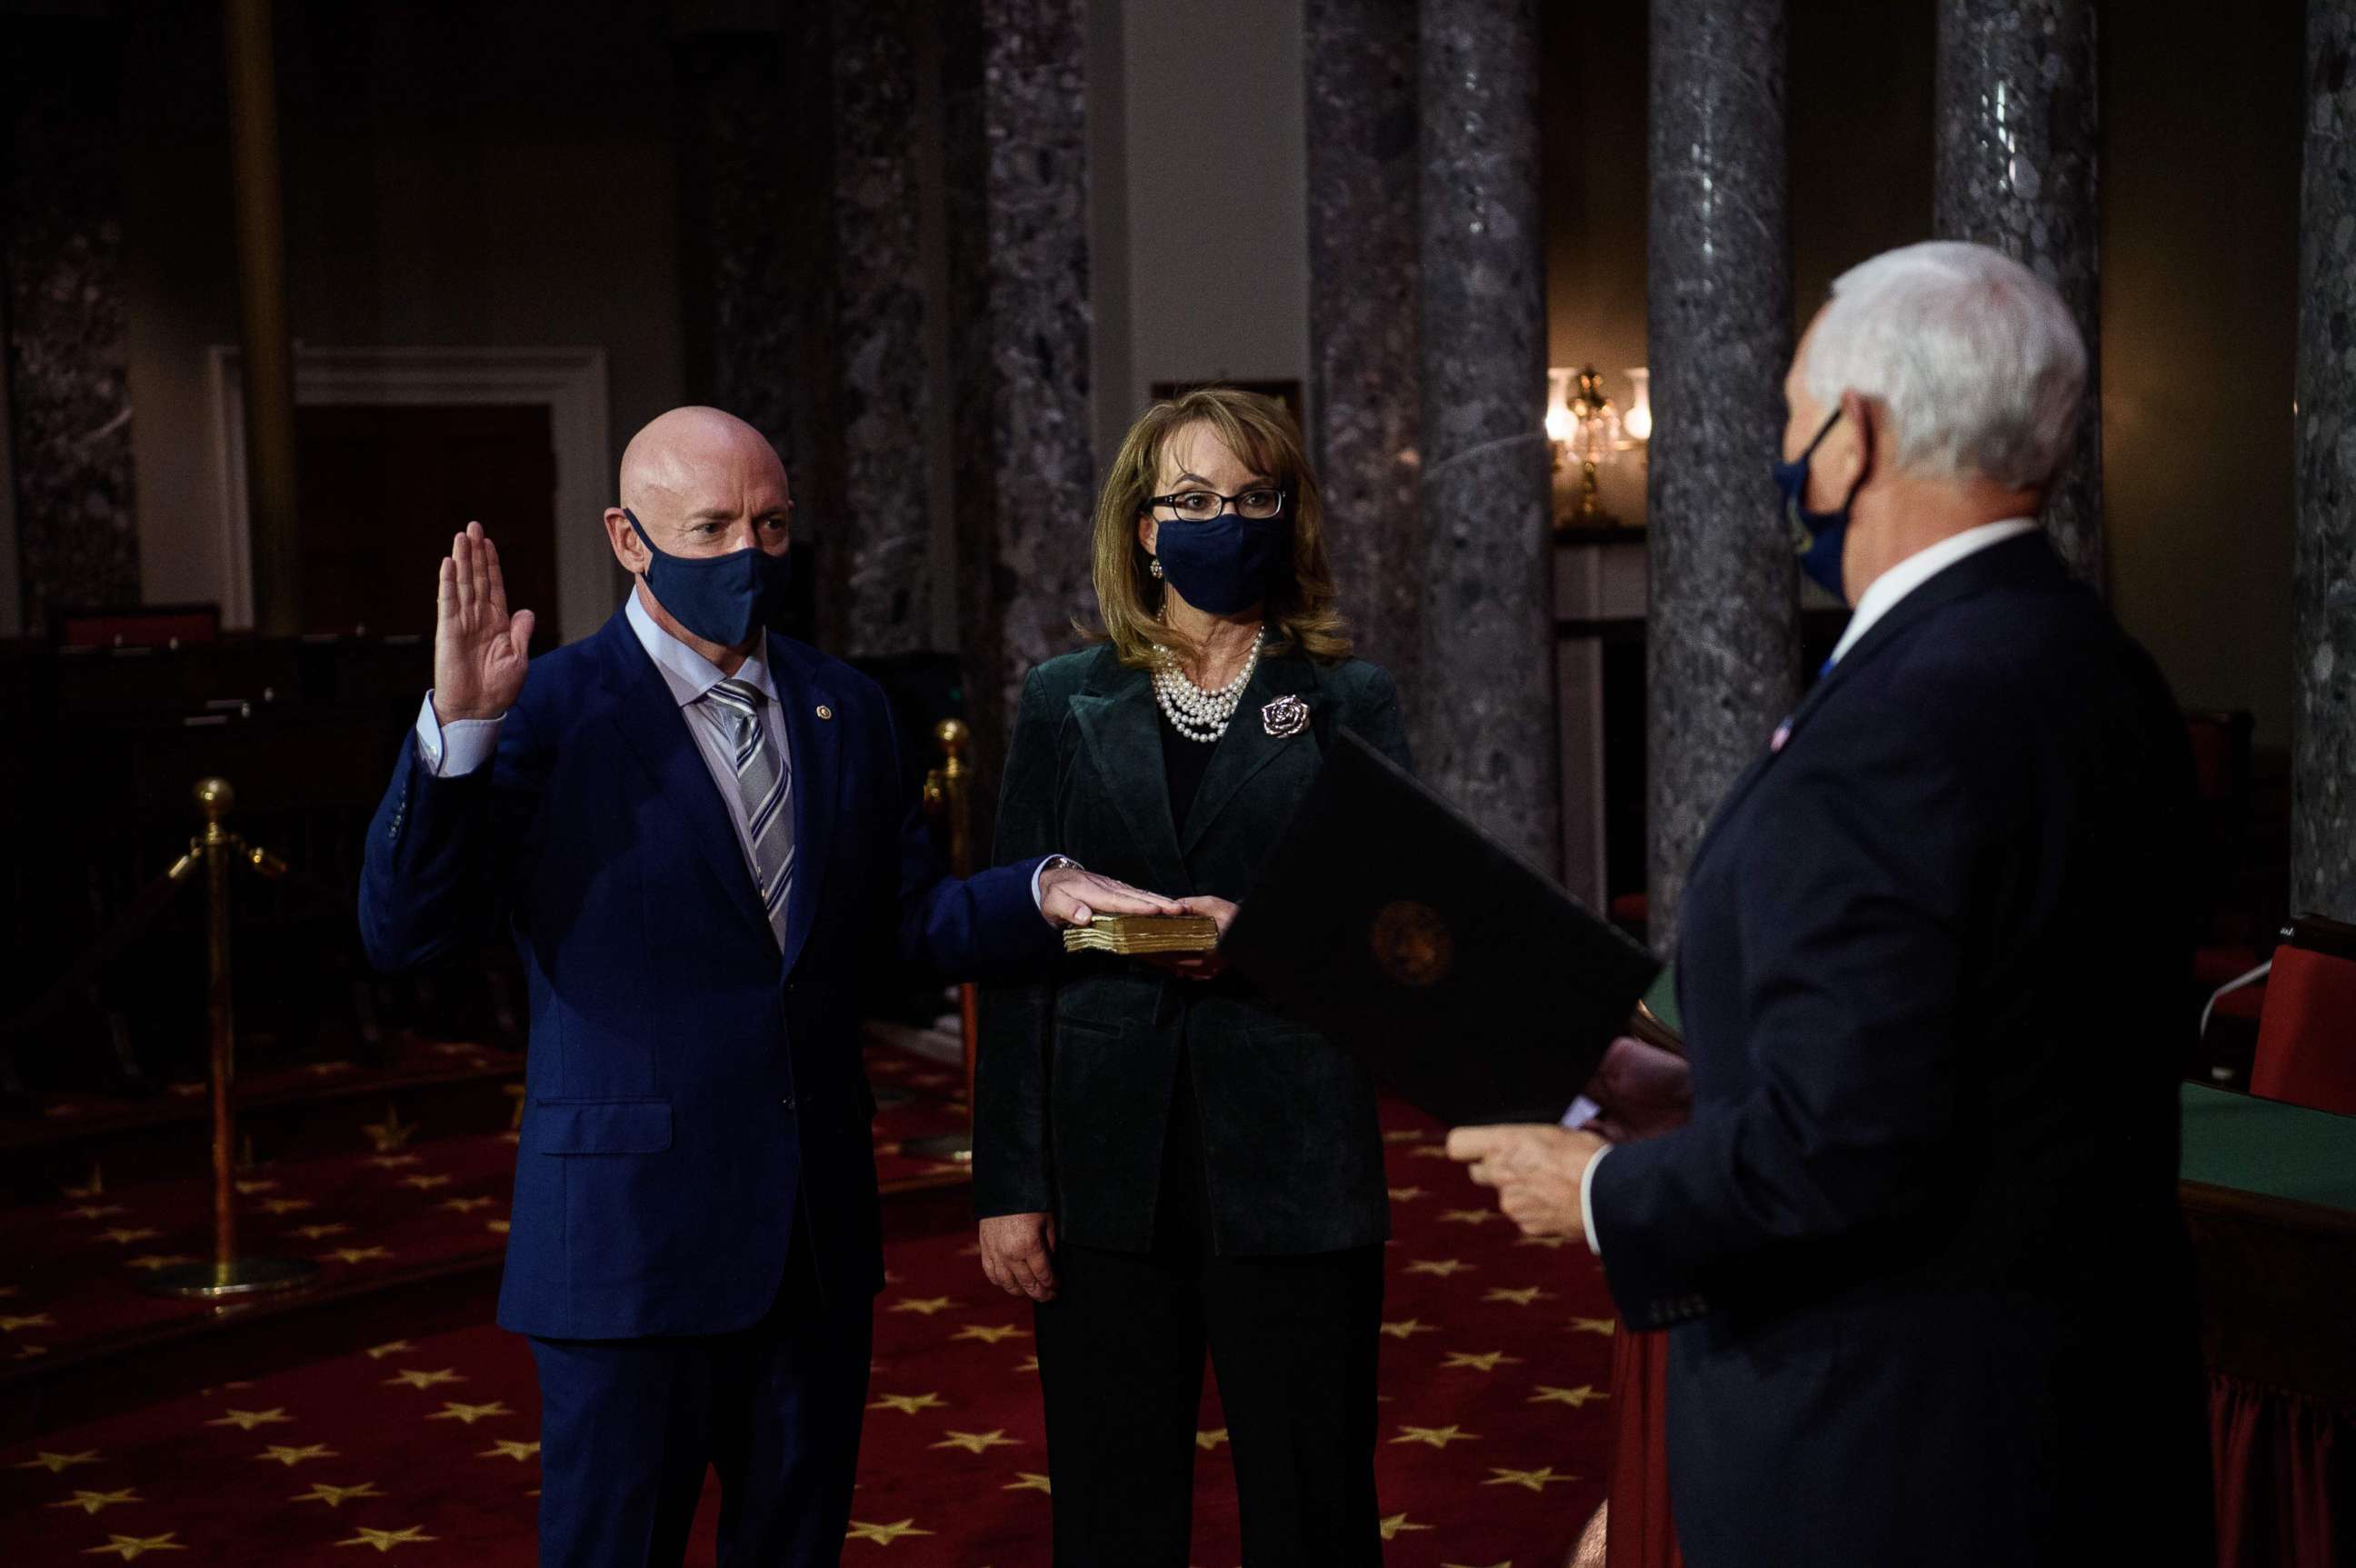 PHOTO: Democratic Senator from Arizona, Mark Kelly, with his wife, former Representative from Arizona Gabby Giffords, is sworn in by Vice President Mike Pence during a ceremonial re-enactment at the U.S. Capitol in Washington, Dec. 2, 2020.